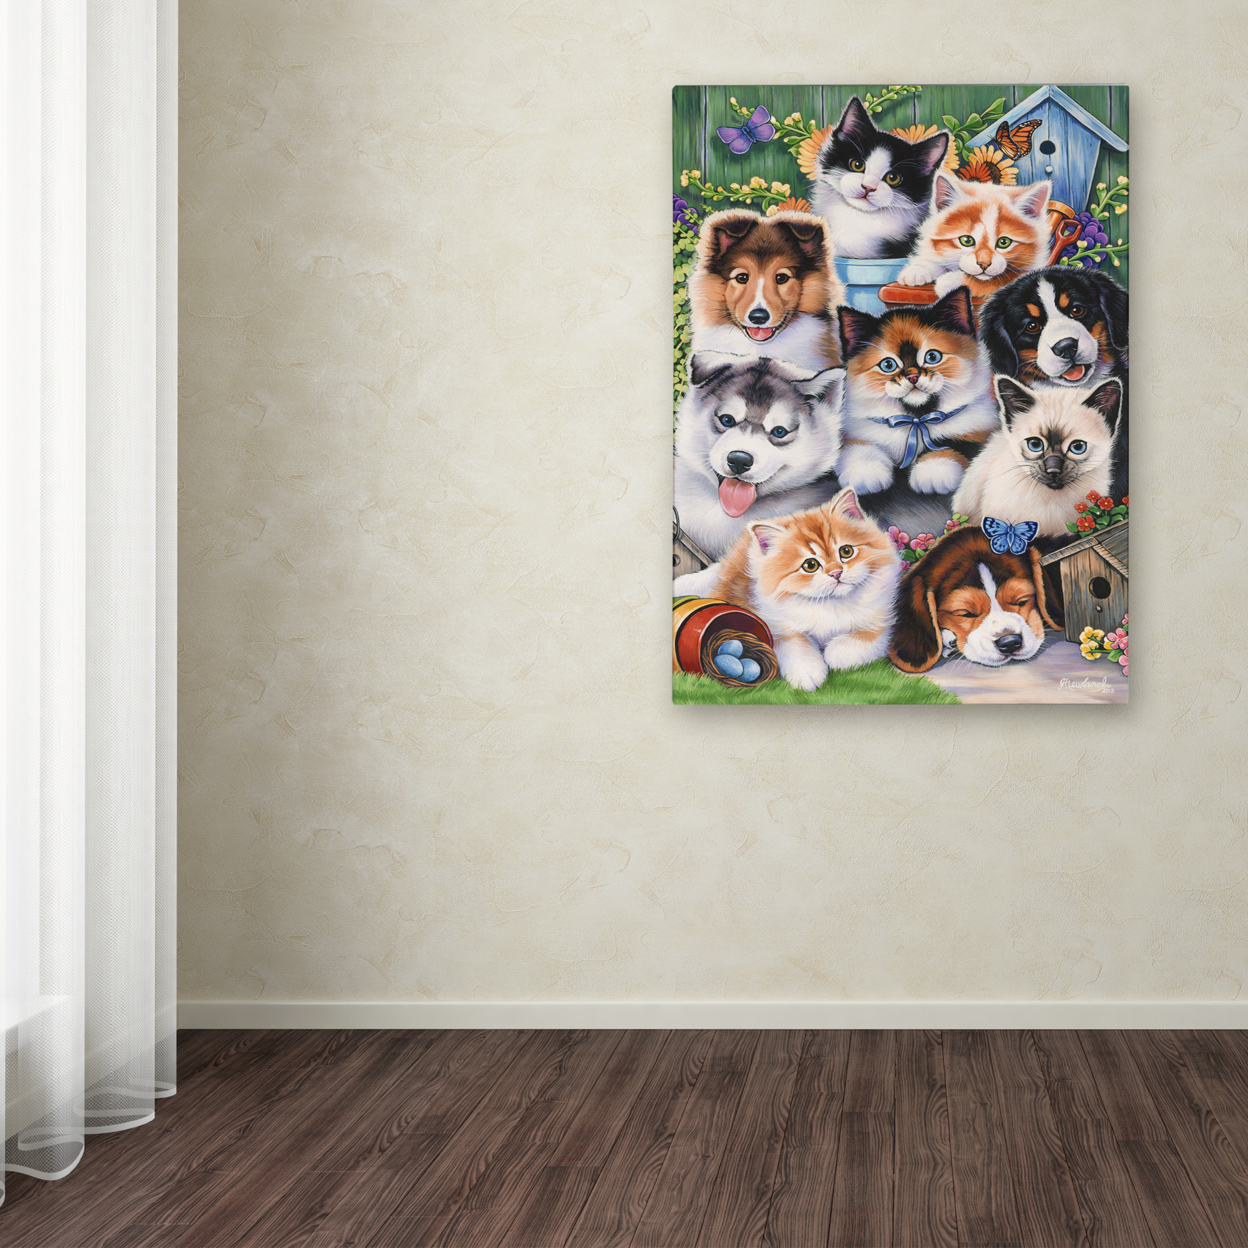 Jenny Newland 'Kittens & Puppies In The Garden' Canvas Wall Art 35 X 47 Inches